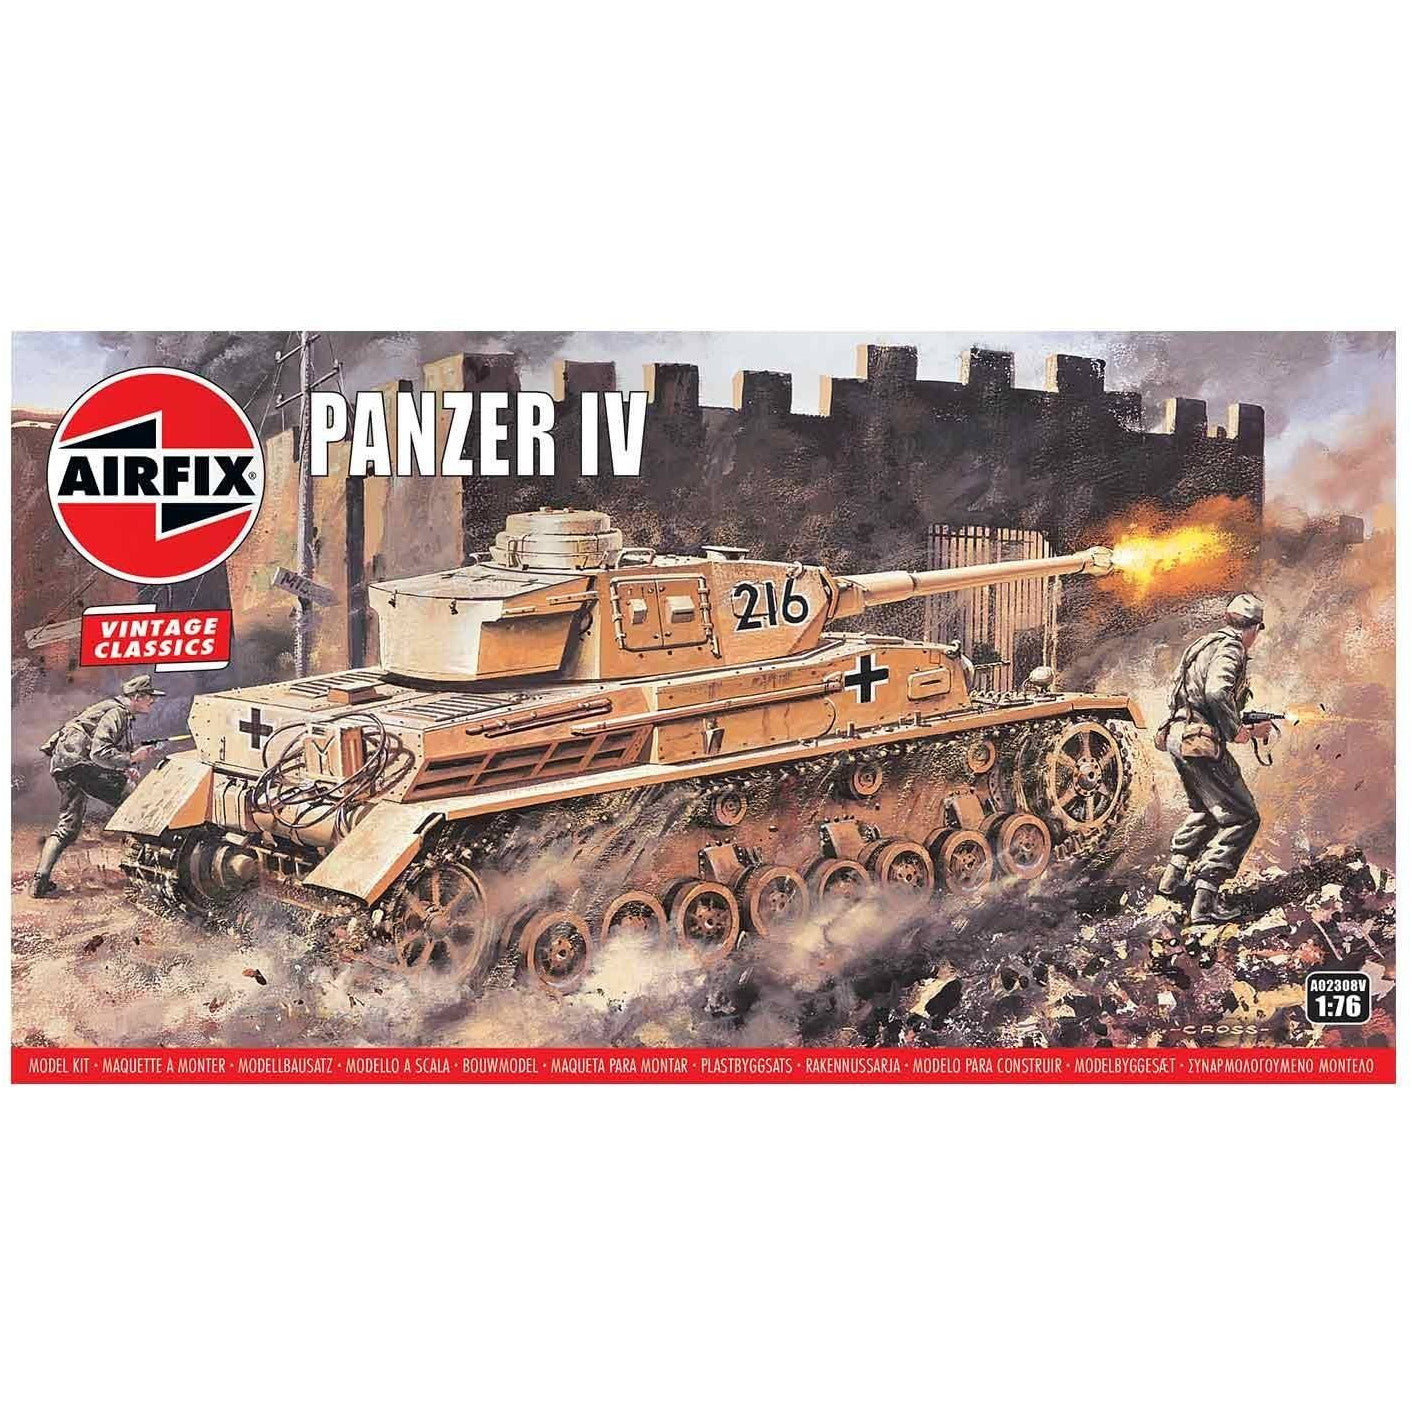 Panzer IV 1/76 by Airfix